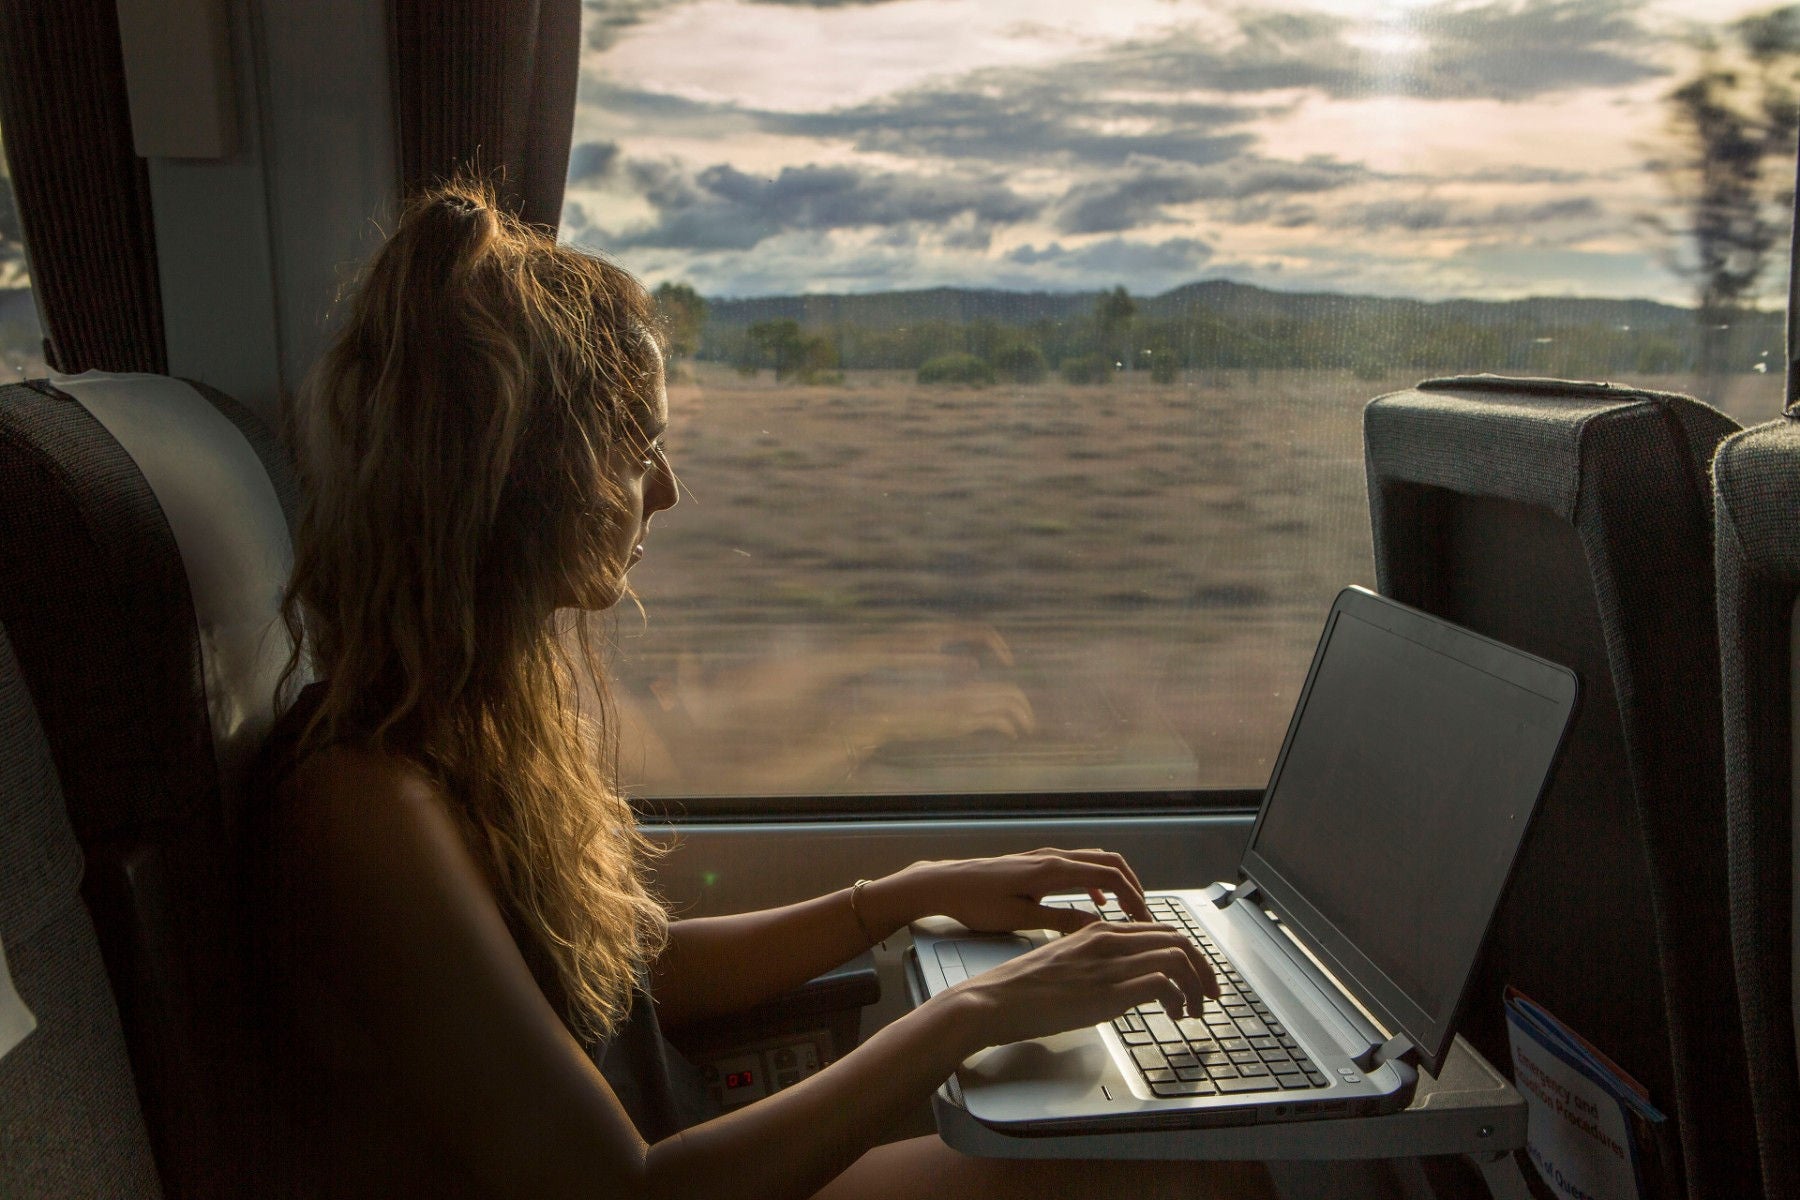 Woman works on her laptop while traveling on-a train